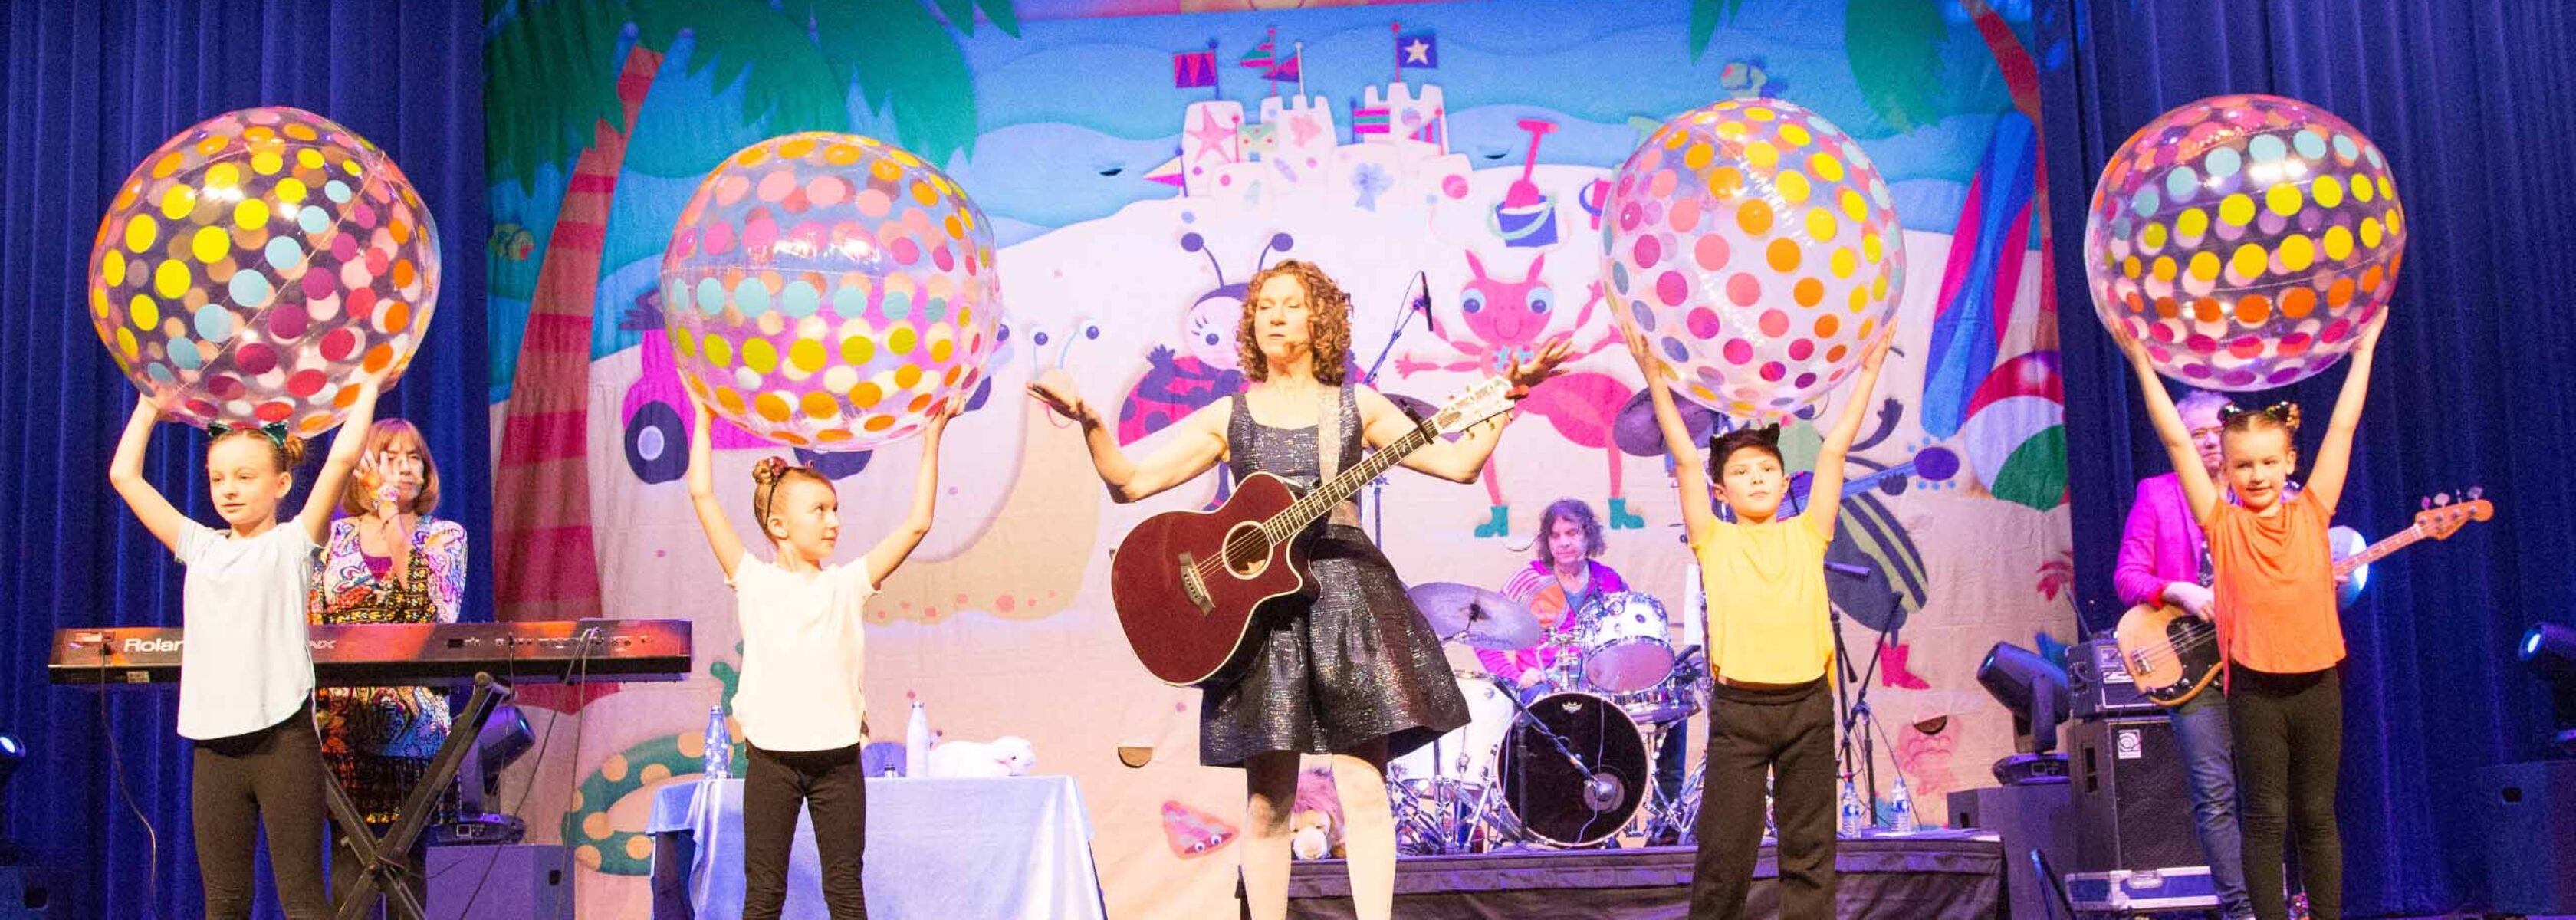 woman performing with a guitar on stage next to kids holding inflatable balls over their heads.